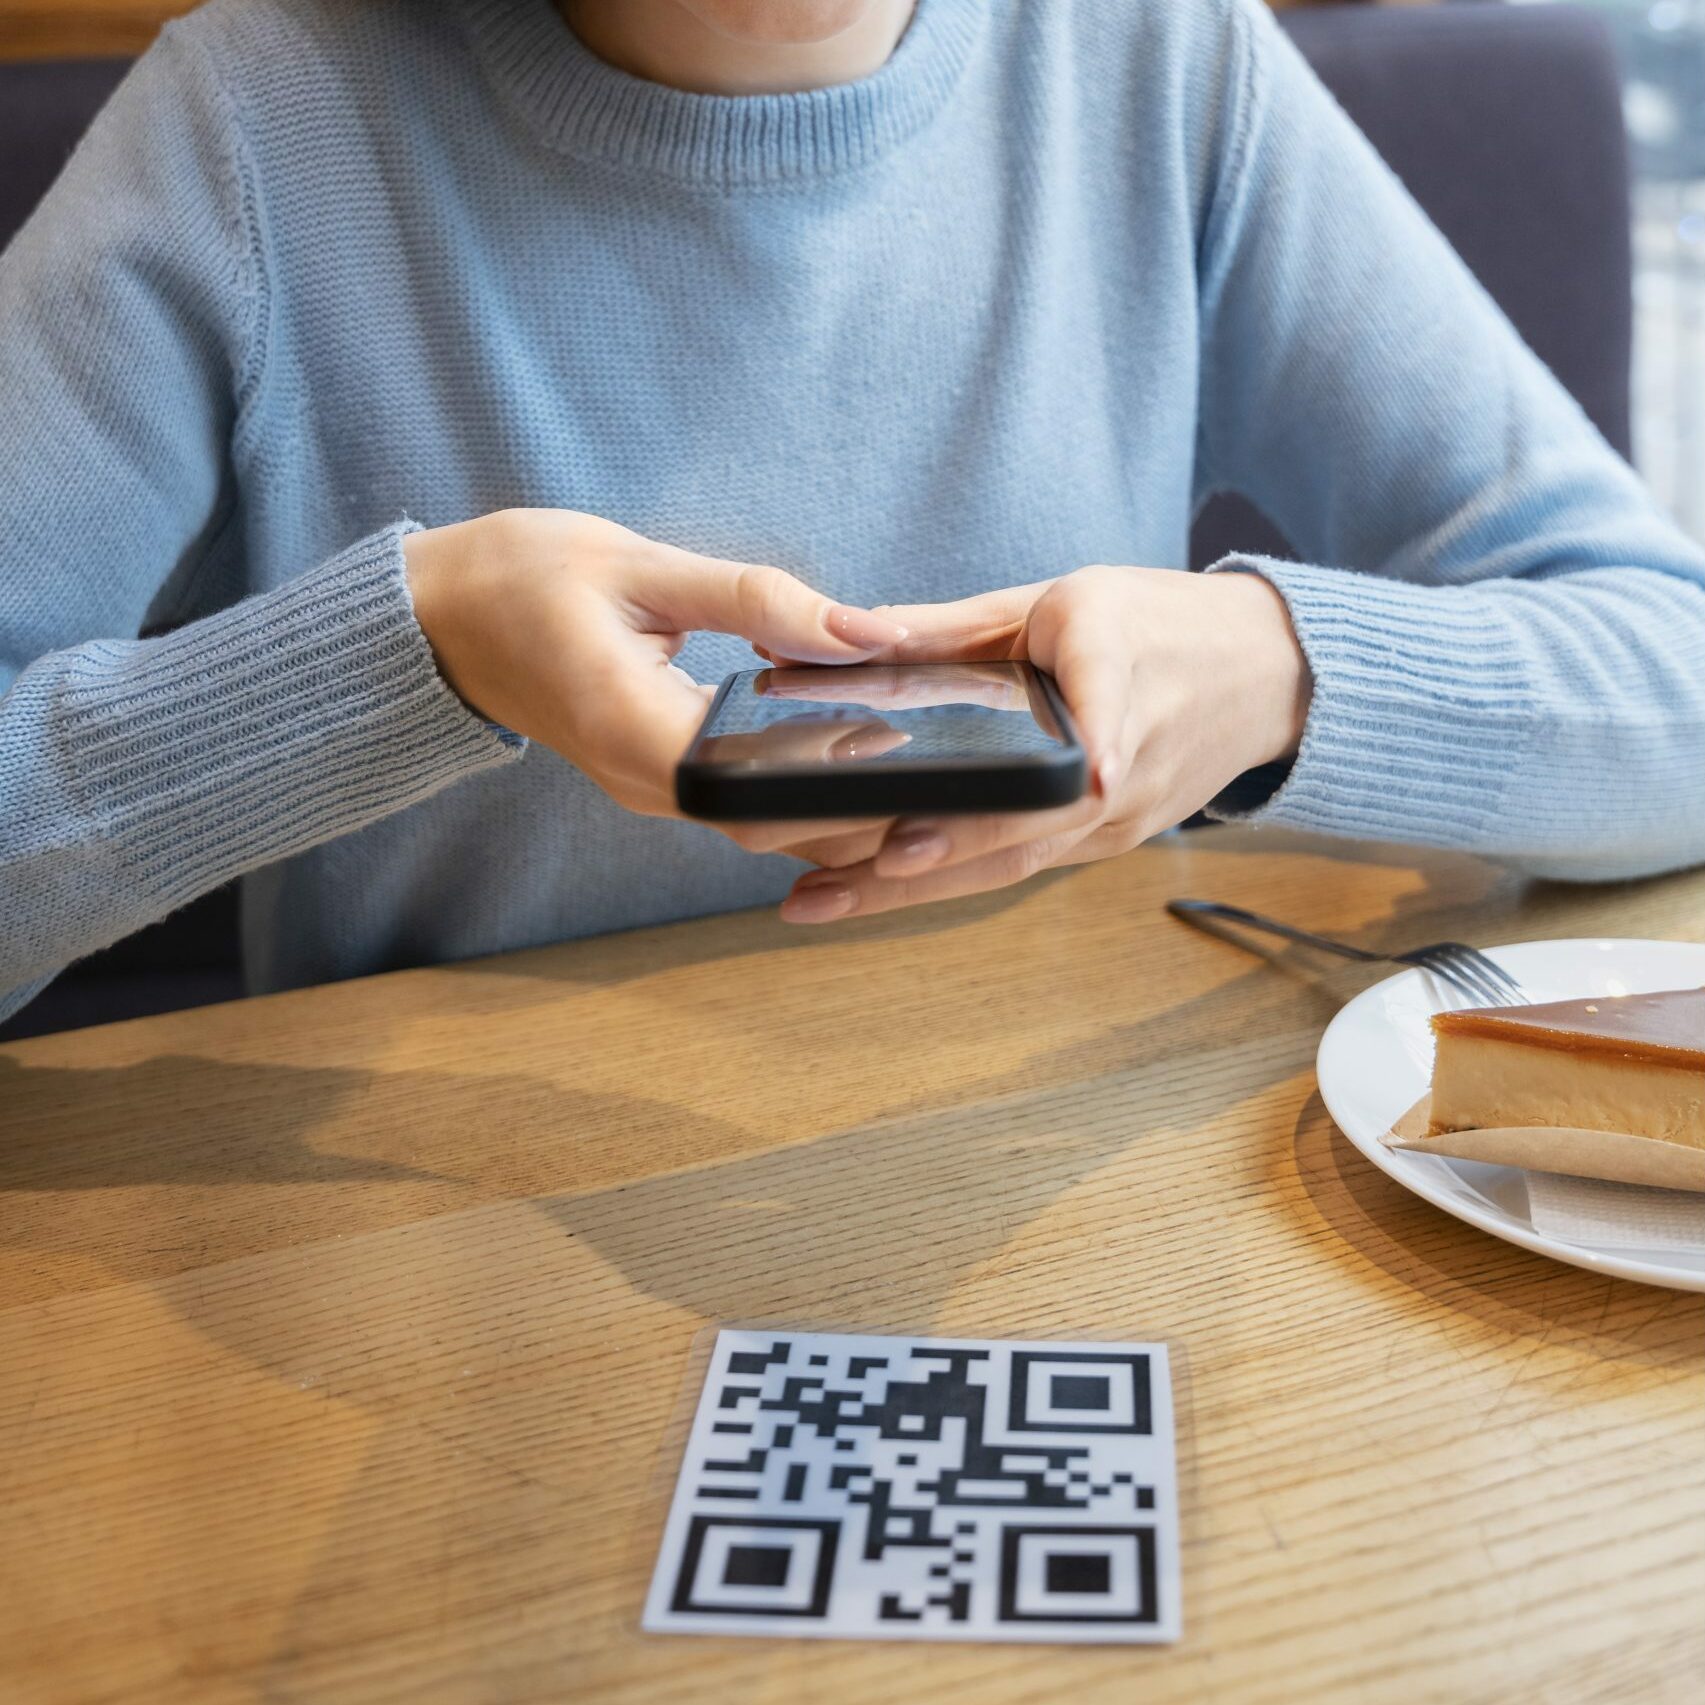 someone scanning a QR code at a restaurant